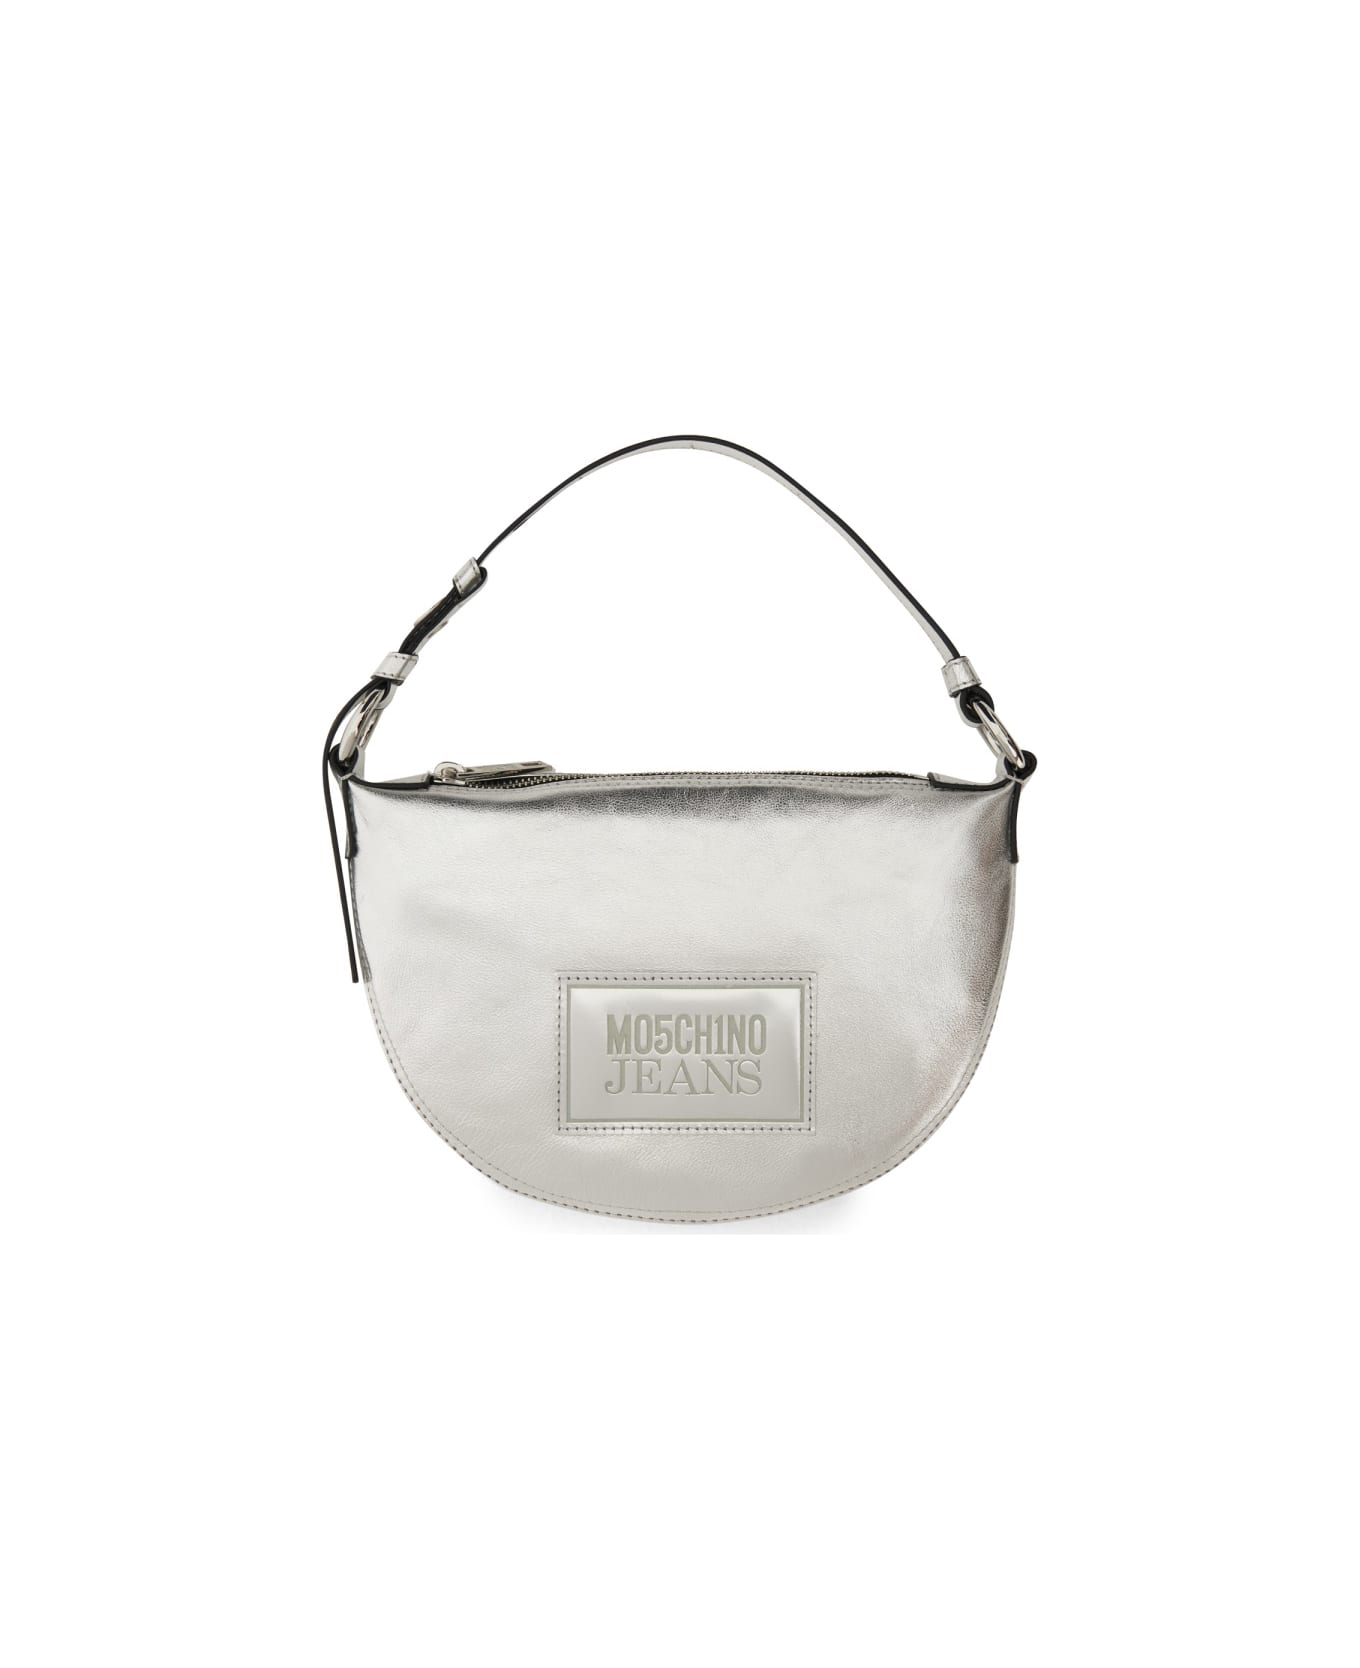 M05CH1N0 Jeans Hand Bag With Logo - SILVER